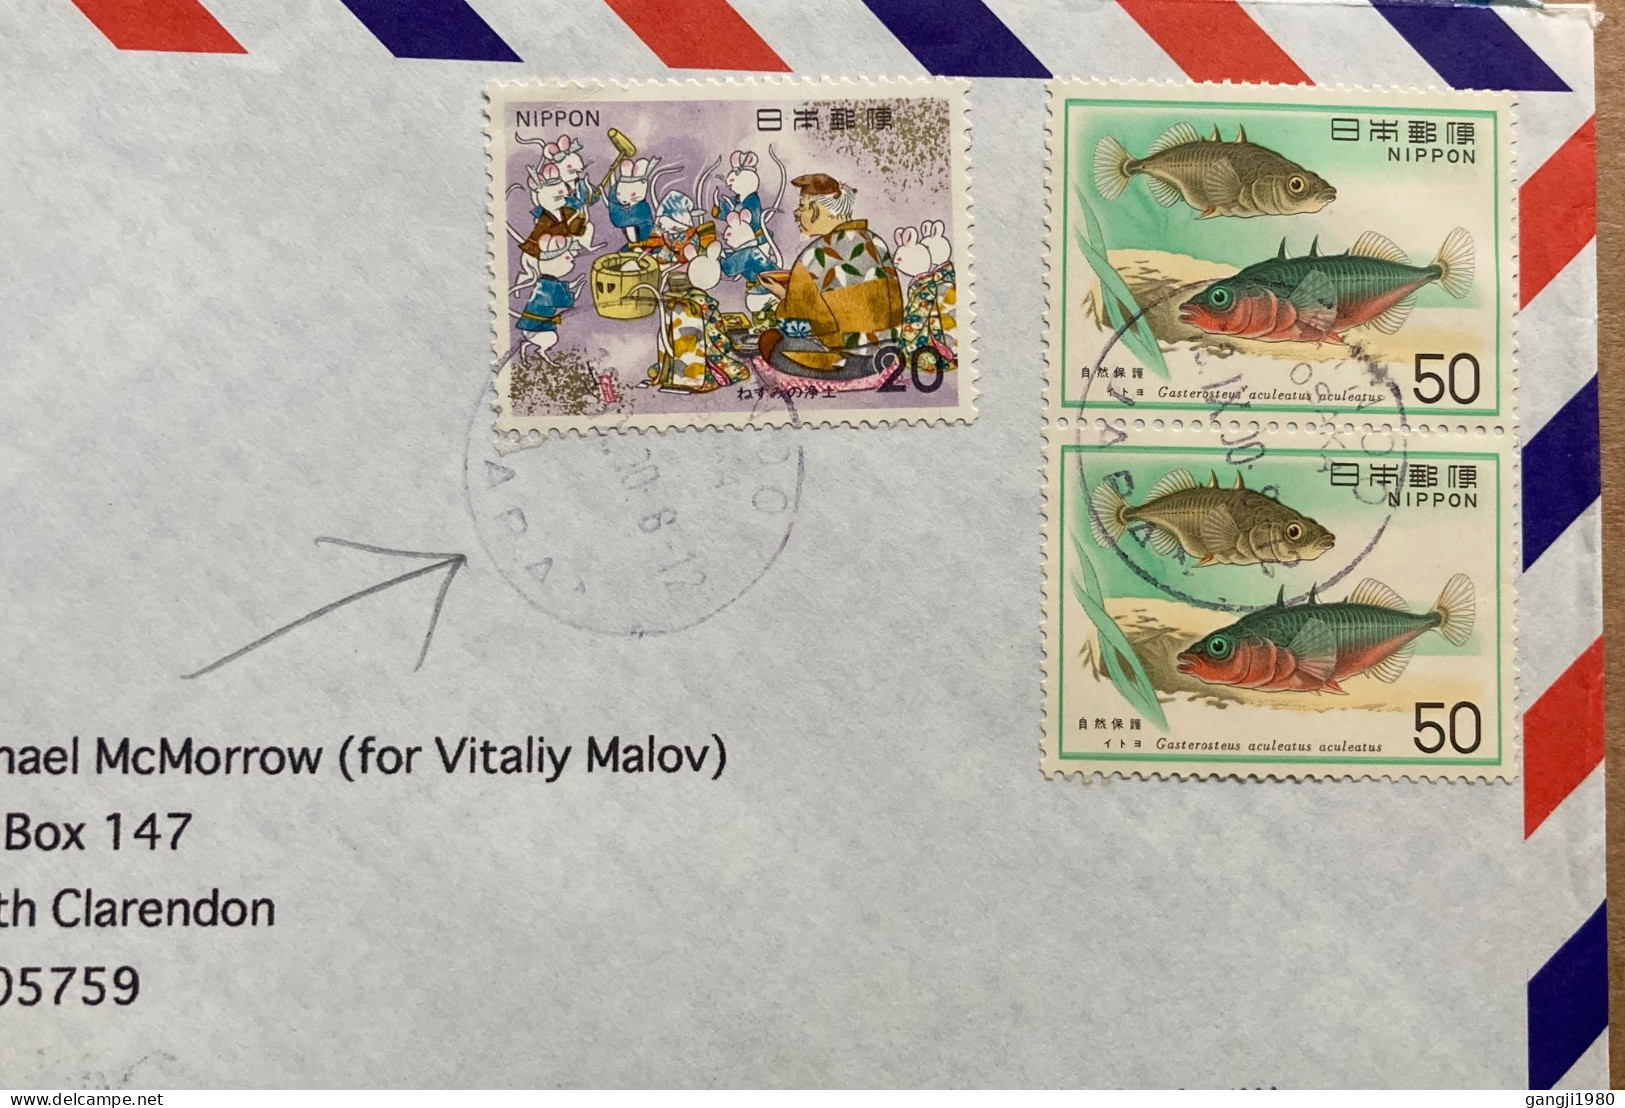 JAPAN 1980, COVER USED TO USA, DISNEY, MICKY MOUSE, FAIRY TALE, CHILDREN STORIES, FISH, 3 STAMP, MINO CITY CANCEL. - Lettres & Documents